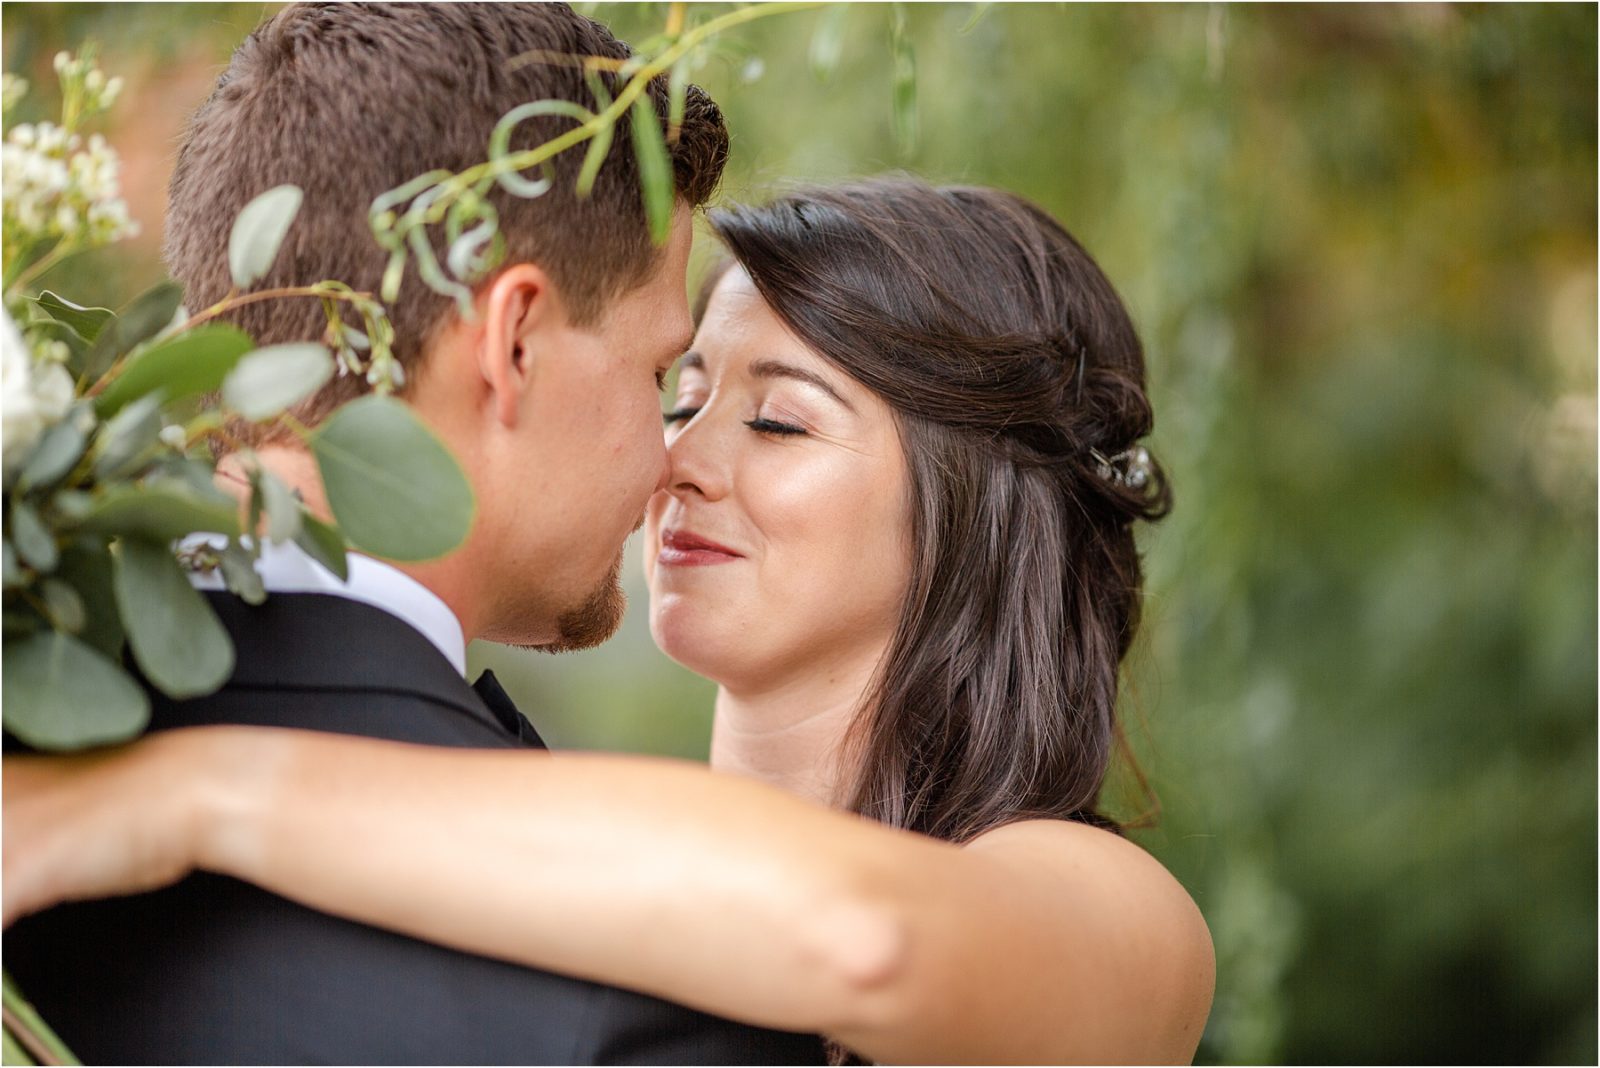 Bride smiles with eyes closed at groom